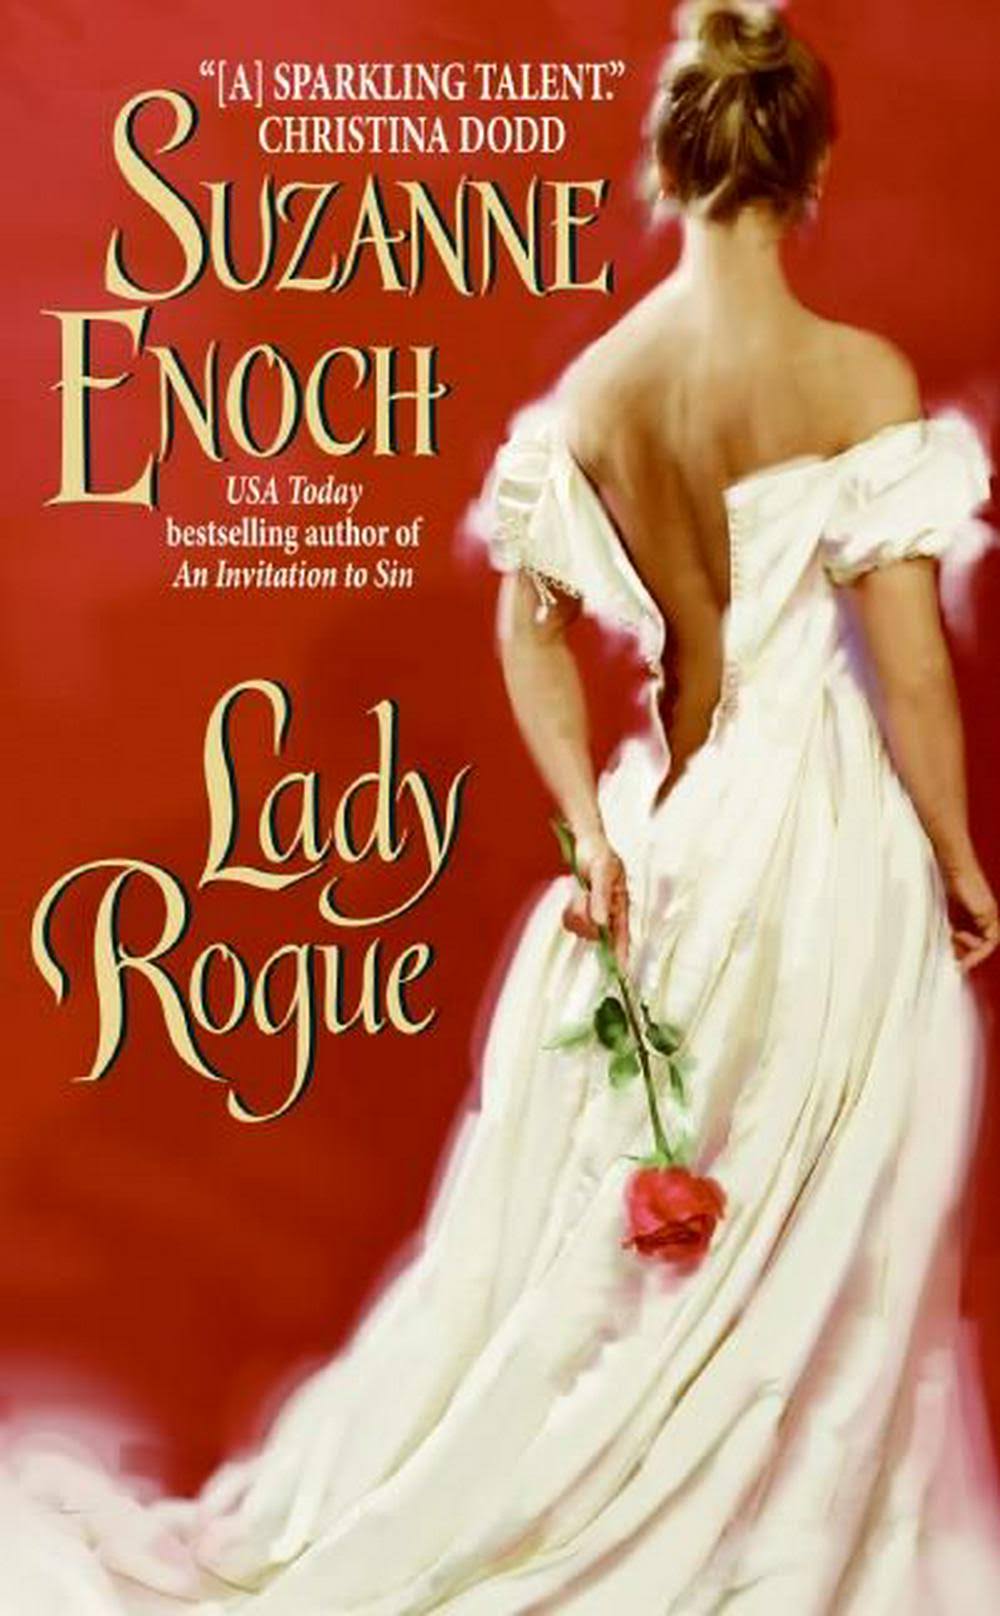 Lady Rogue [Book]